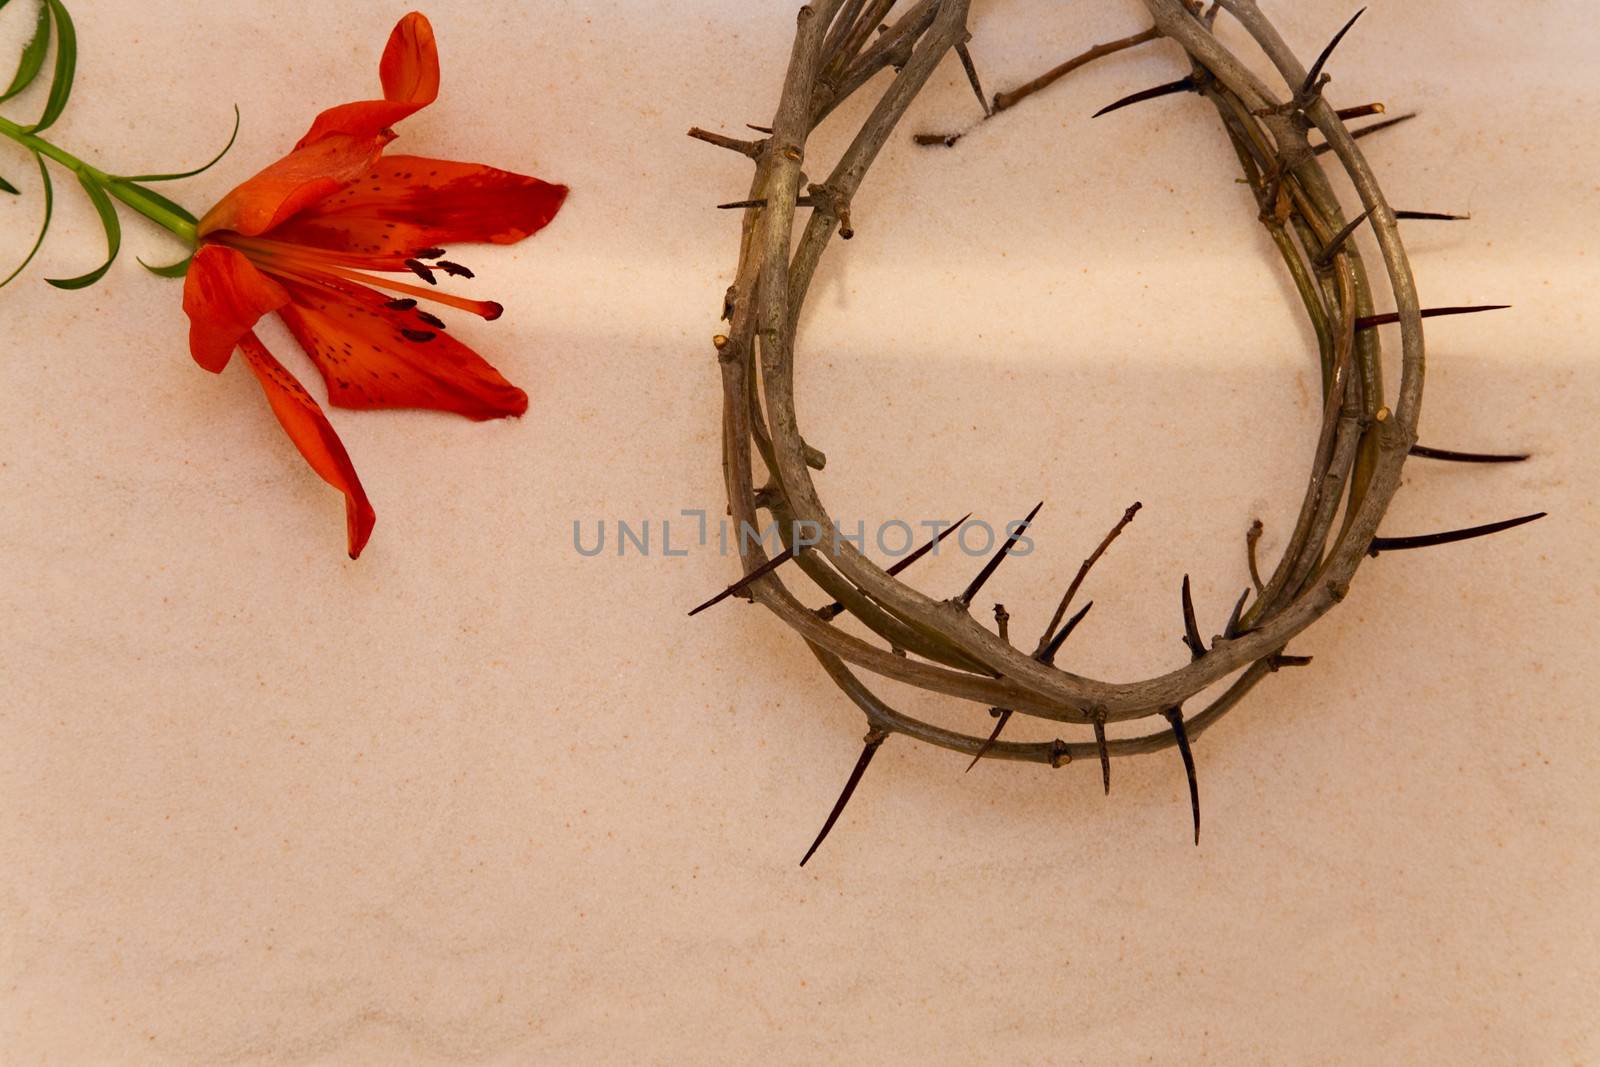 Crown of Thorns and orange Lily on sand background